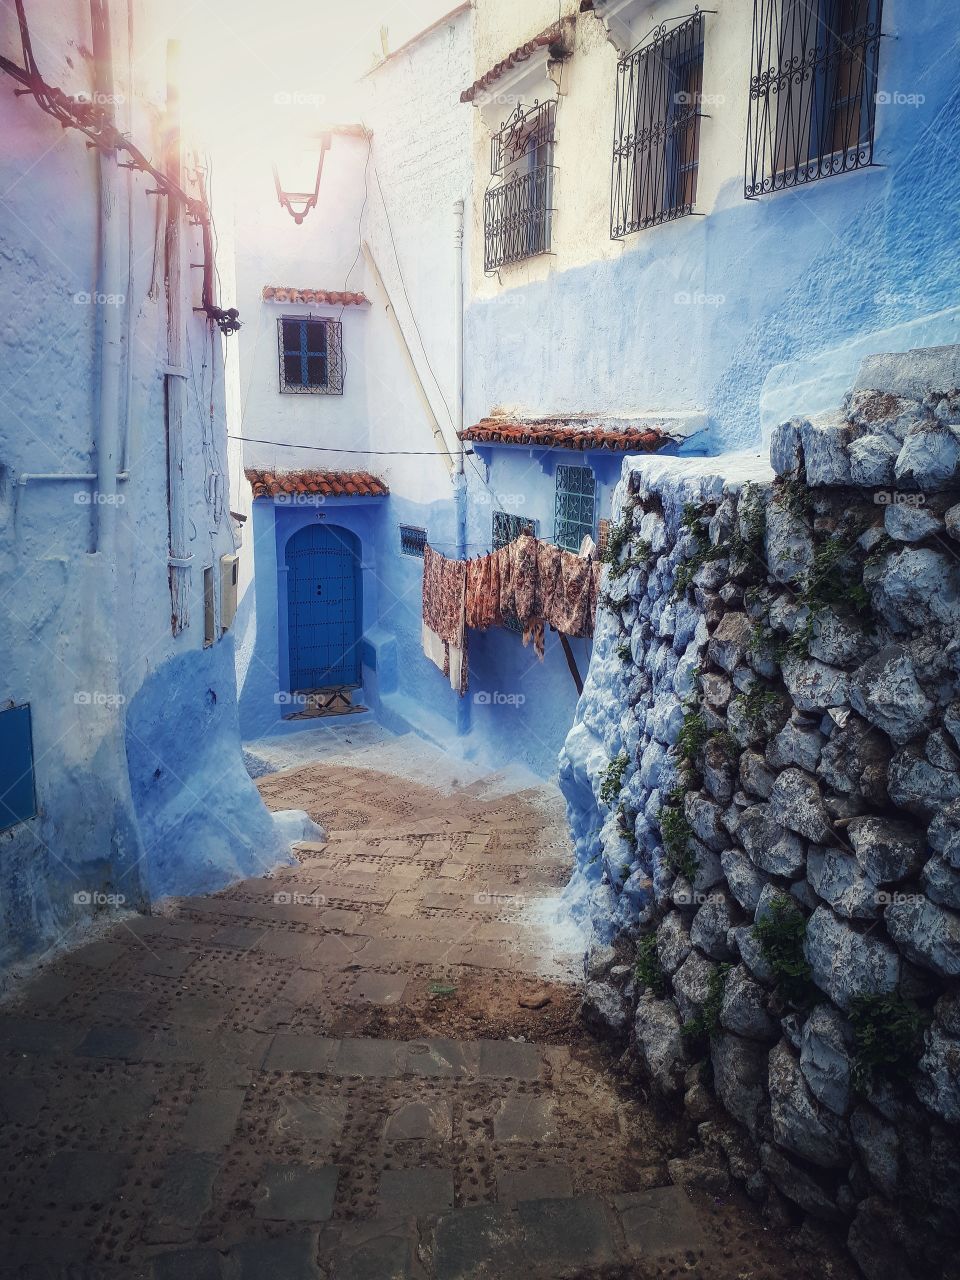 A house in Chefchaouen